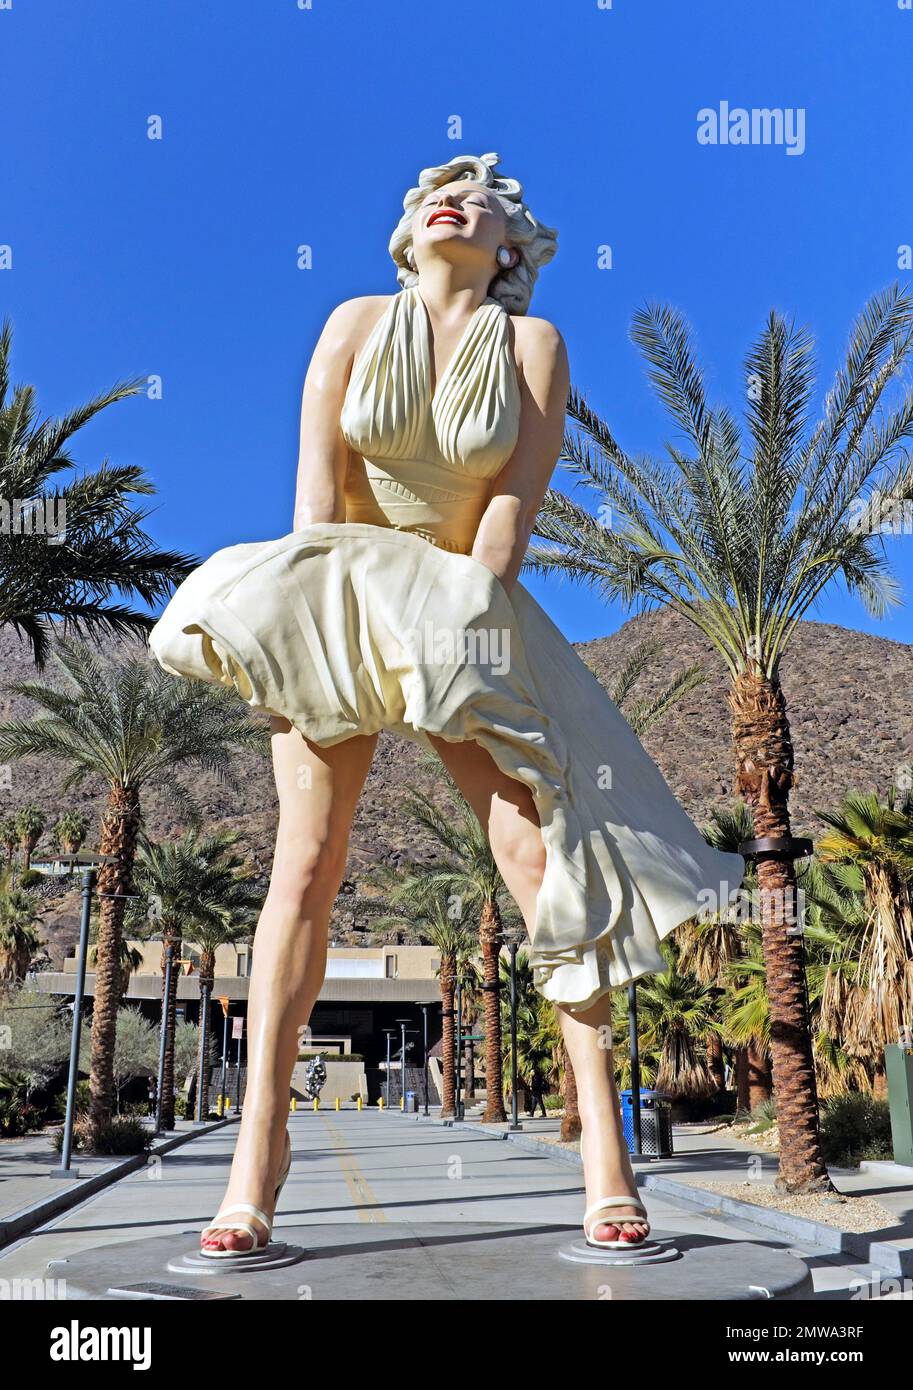 'Forever Marilyn', the 26-foot Marilyn Monroe sculpture by Steward Johnson, in front of the Palm Springs Museum of Art in Palm Springs, California. Stock Photo